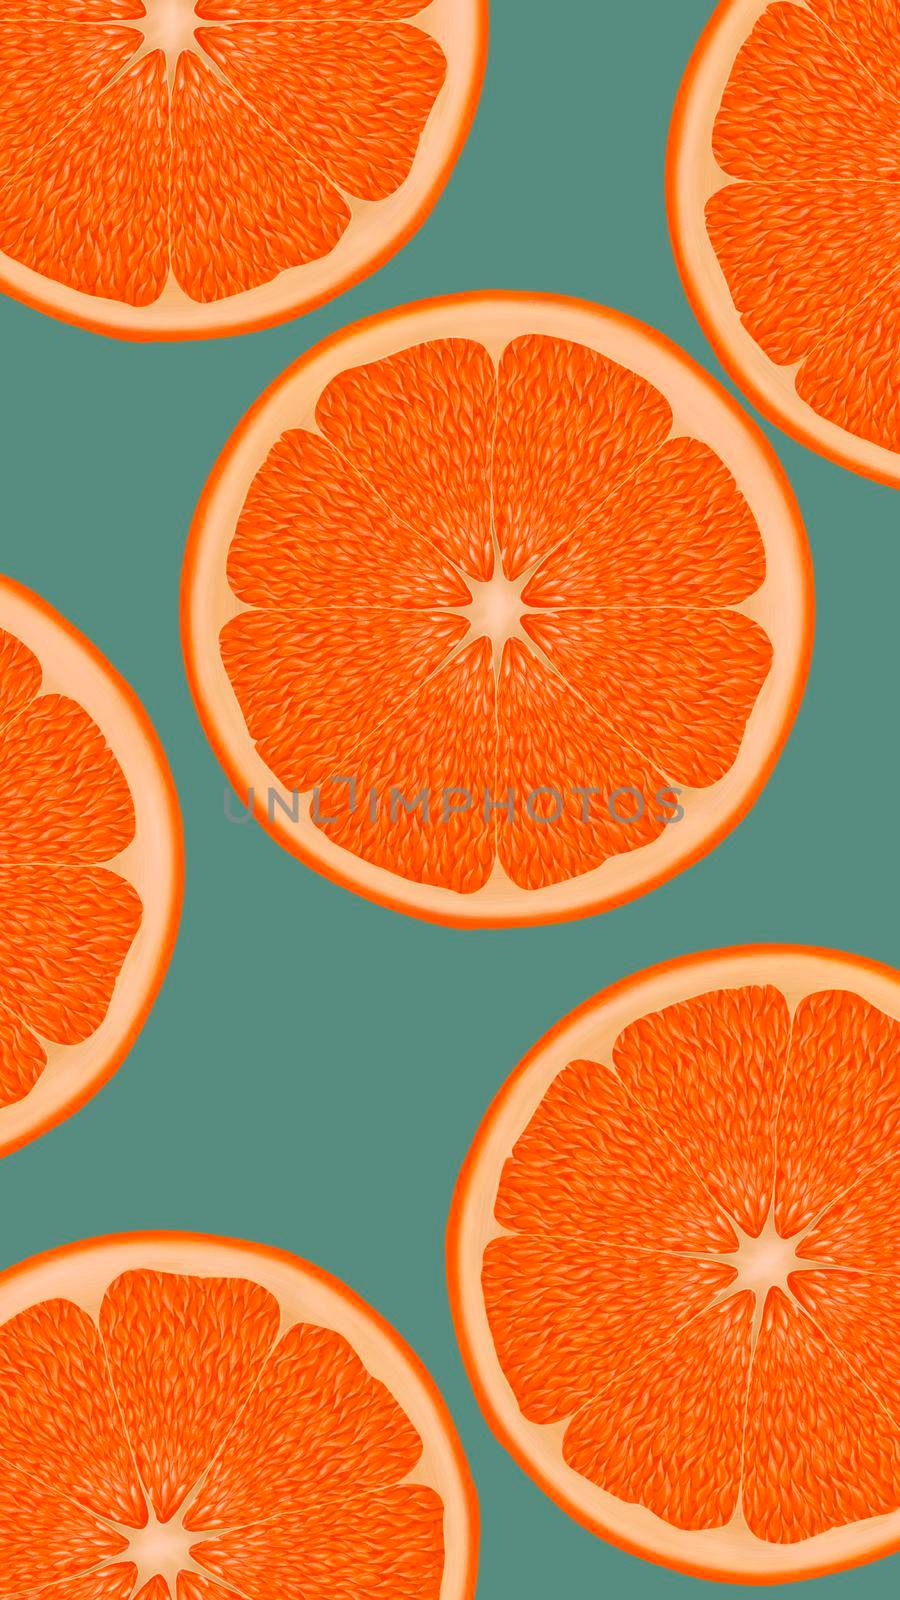 bright fresh summer backgrounds with citruses. High quality photo